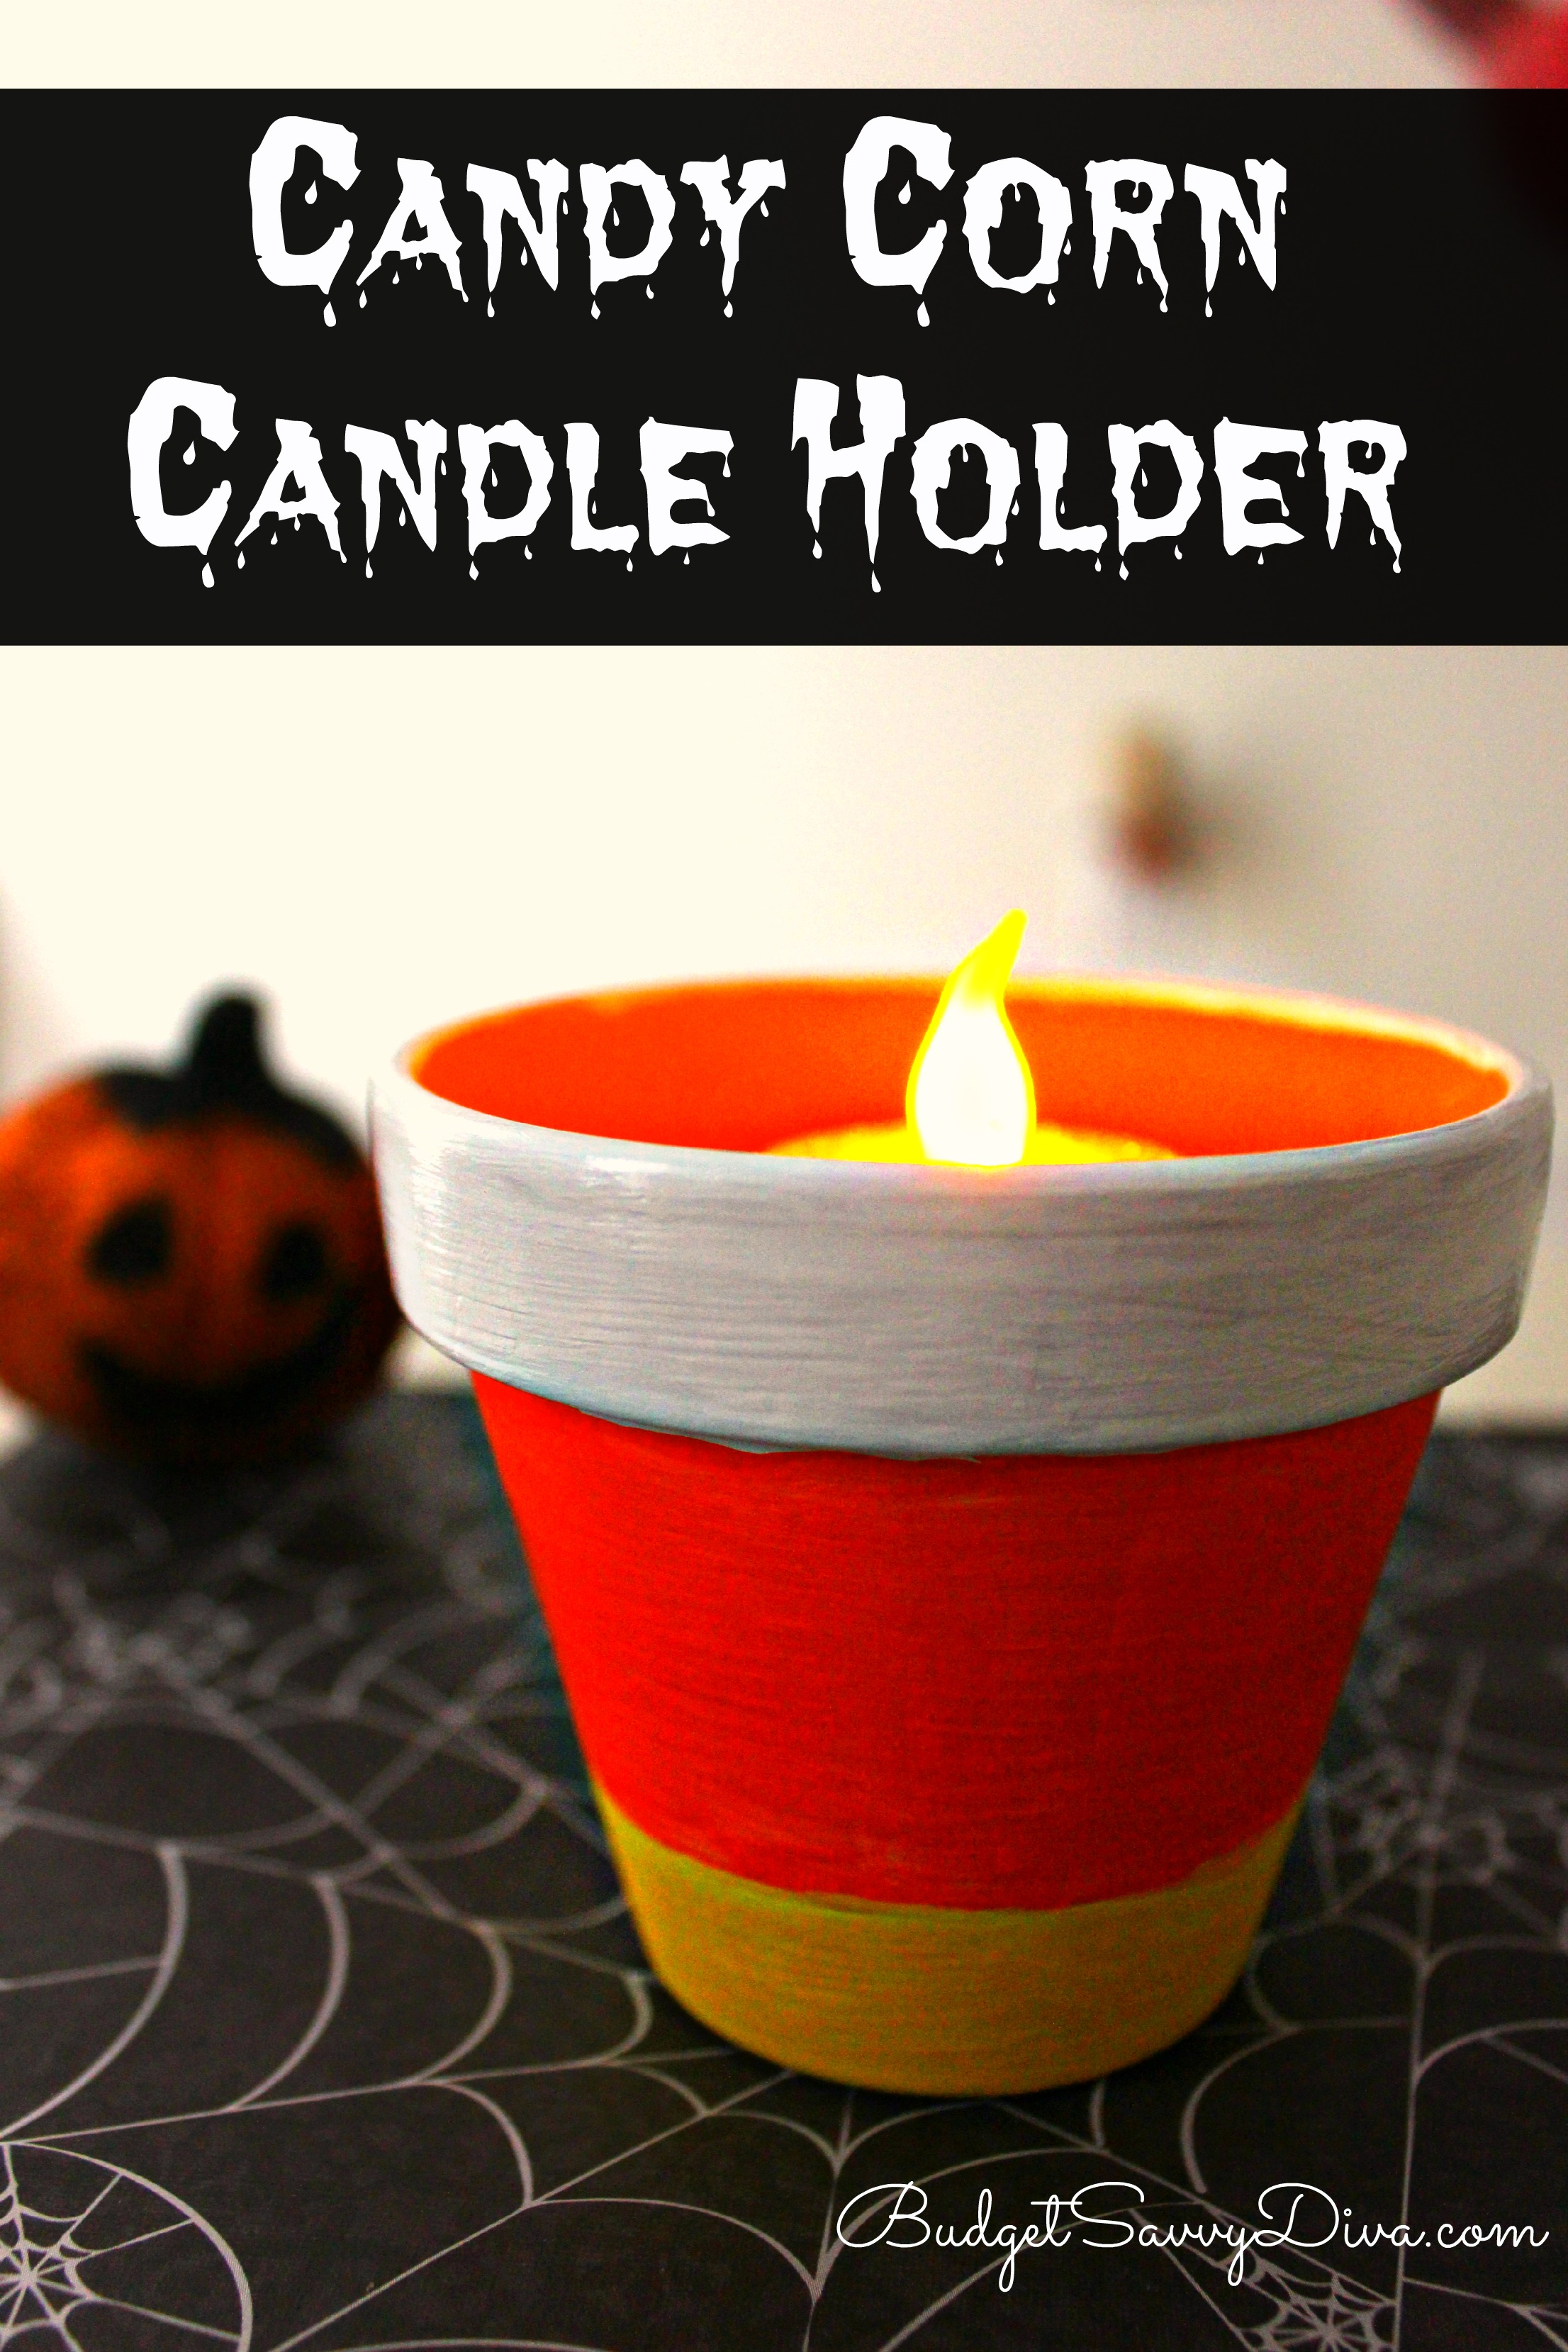 Candy Corn Candle Holder - Budget Savvy Diva